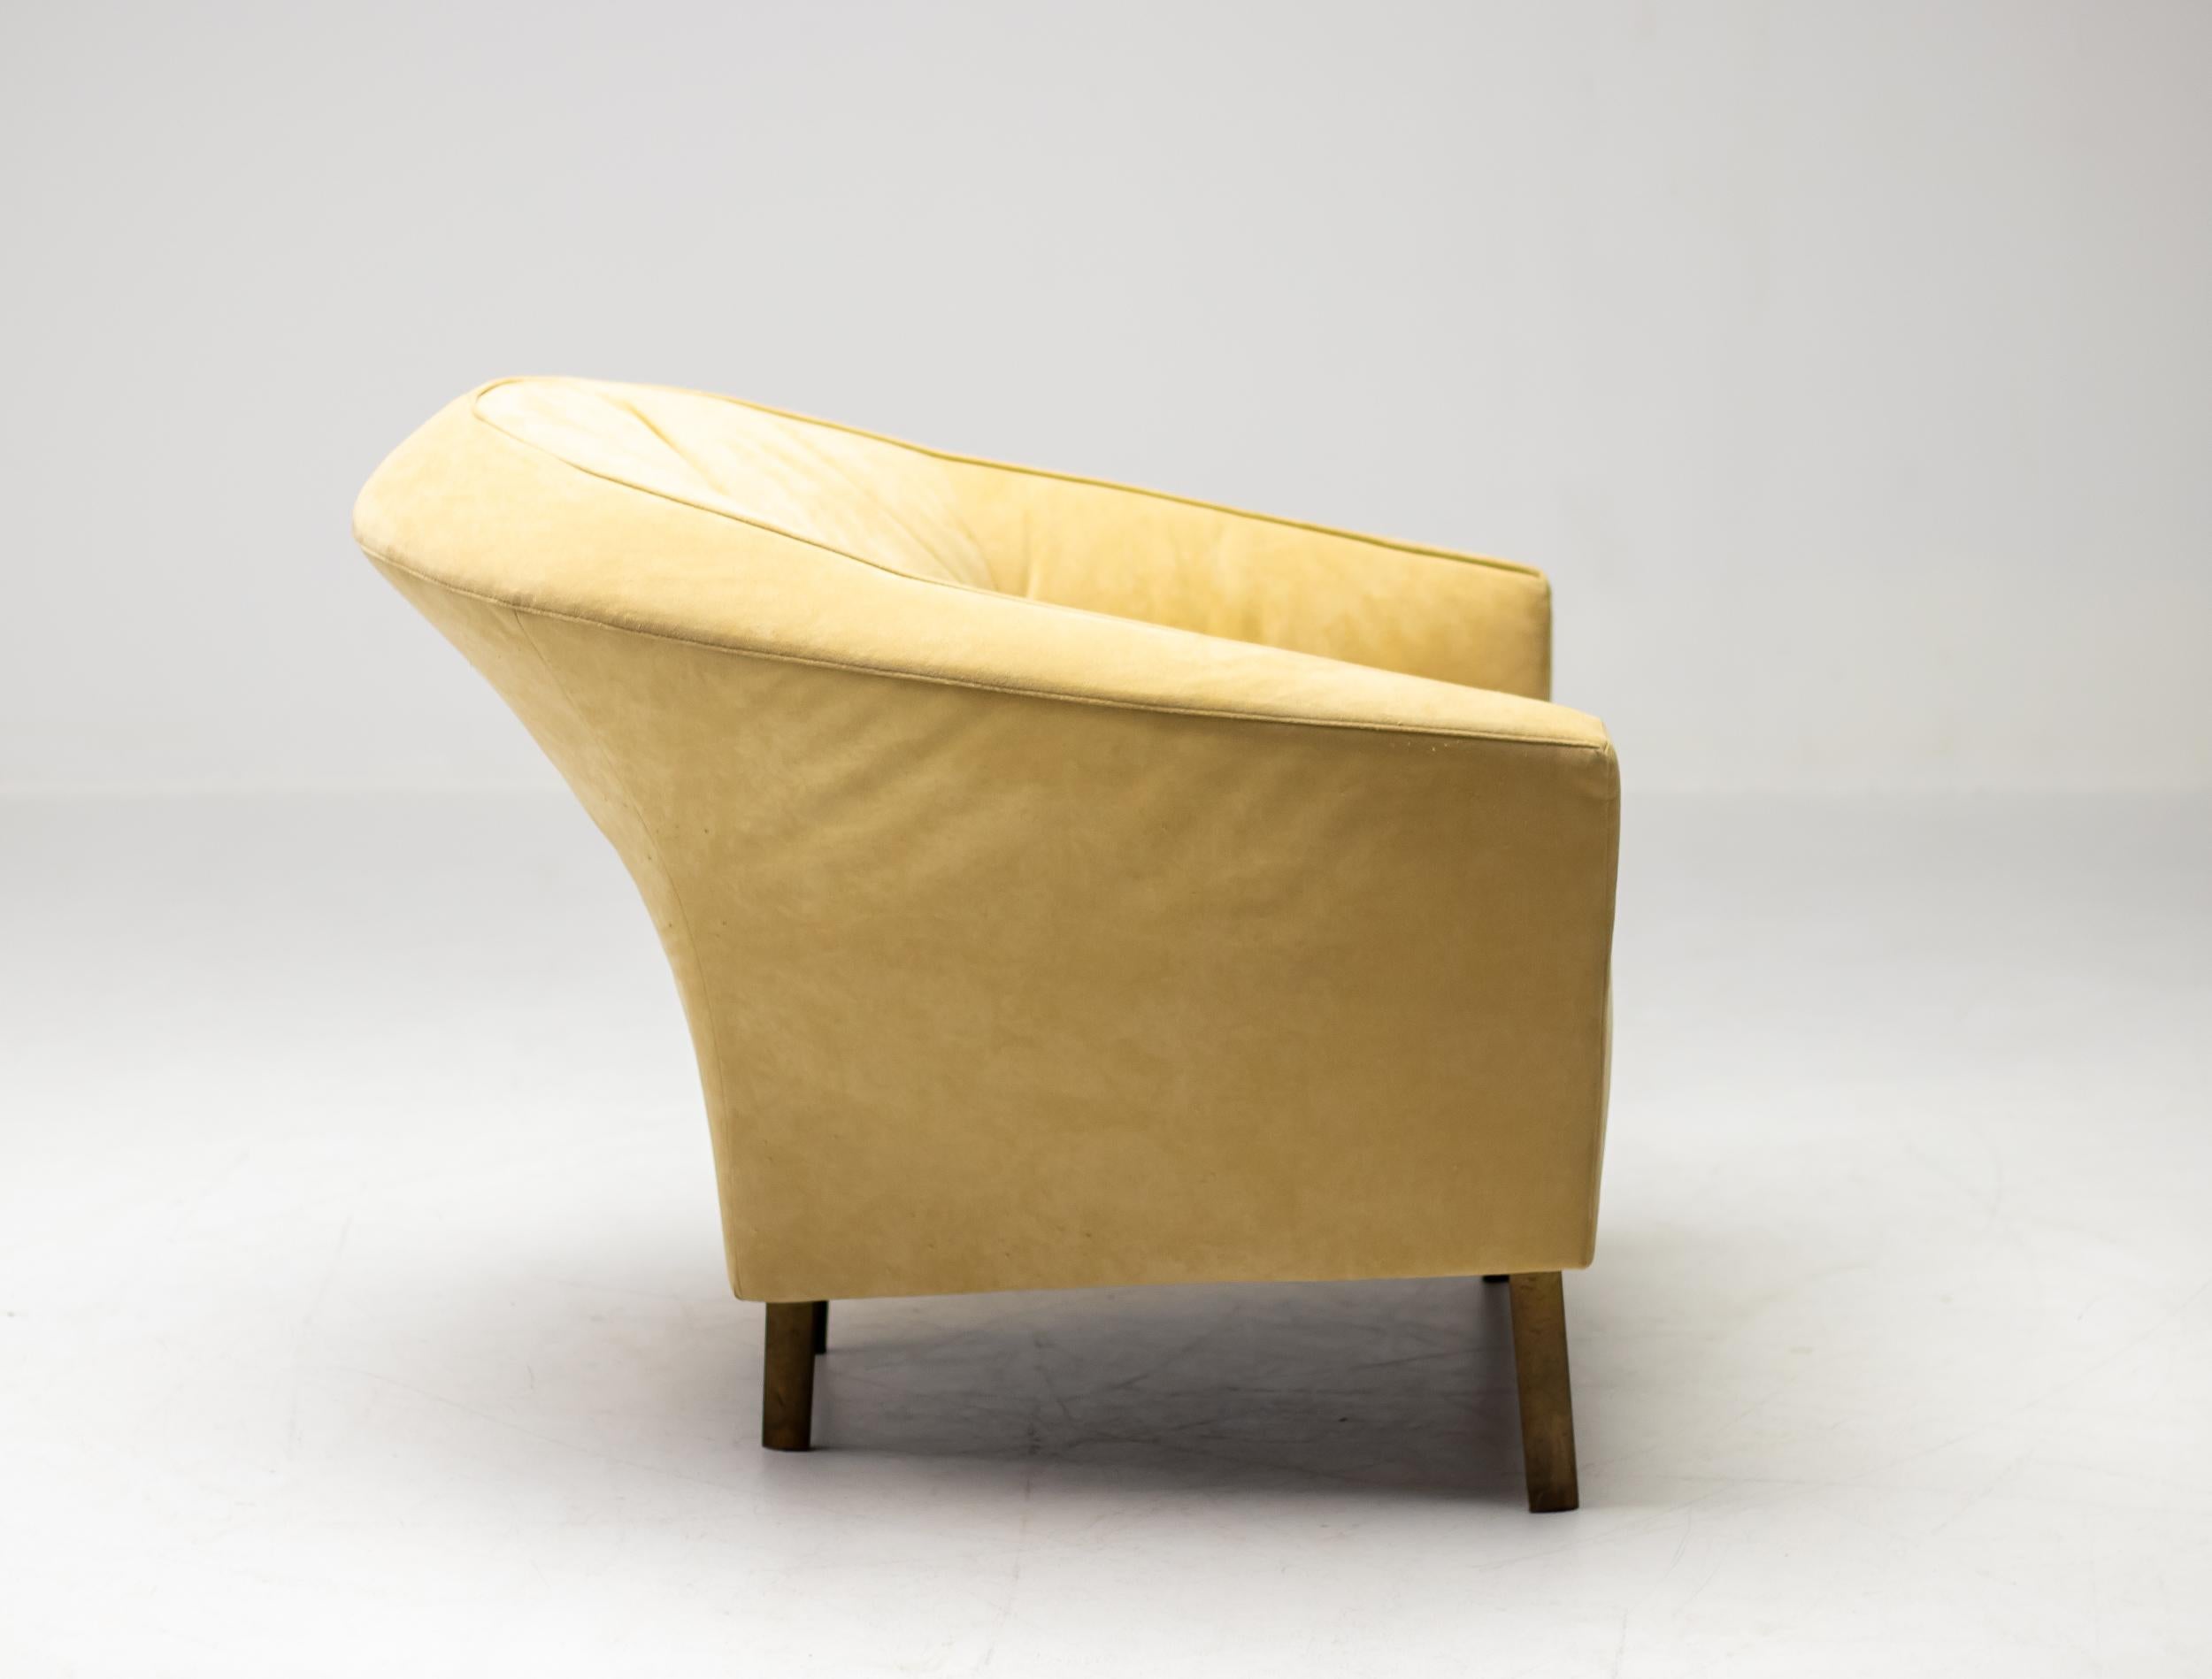 Very elegant sweeping lounge chair by Ligne Roset with cast bronze legs in yellow Alcantara.
Some wear to the Alcantara but very well maintained and free of stains.
Very rare piece, marked with Ligne Roset label.

Please note that we do advise